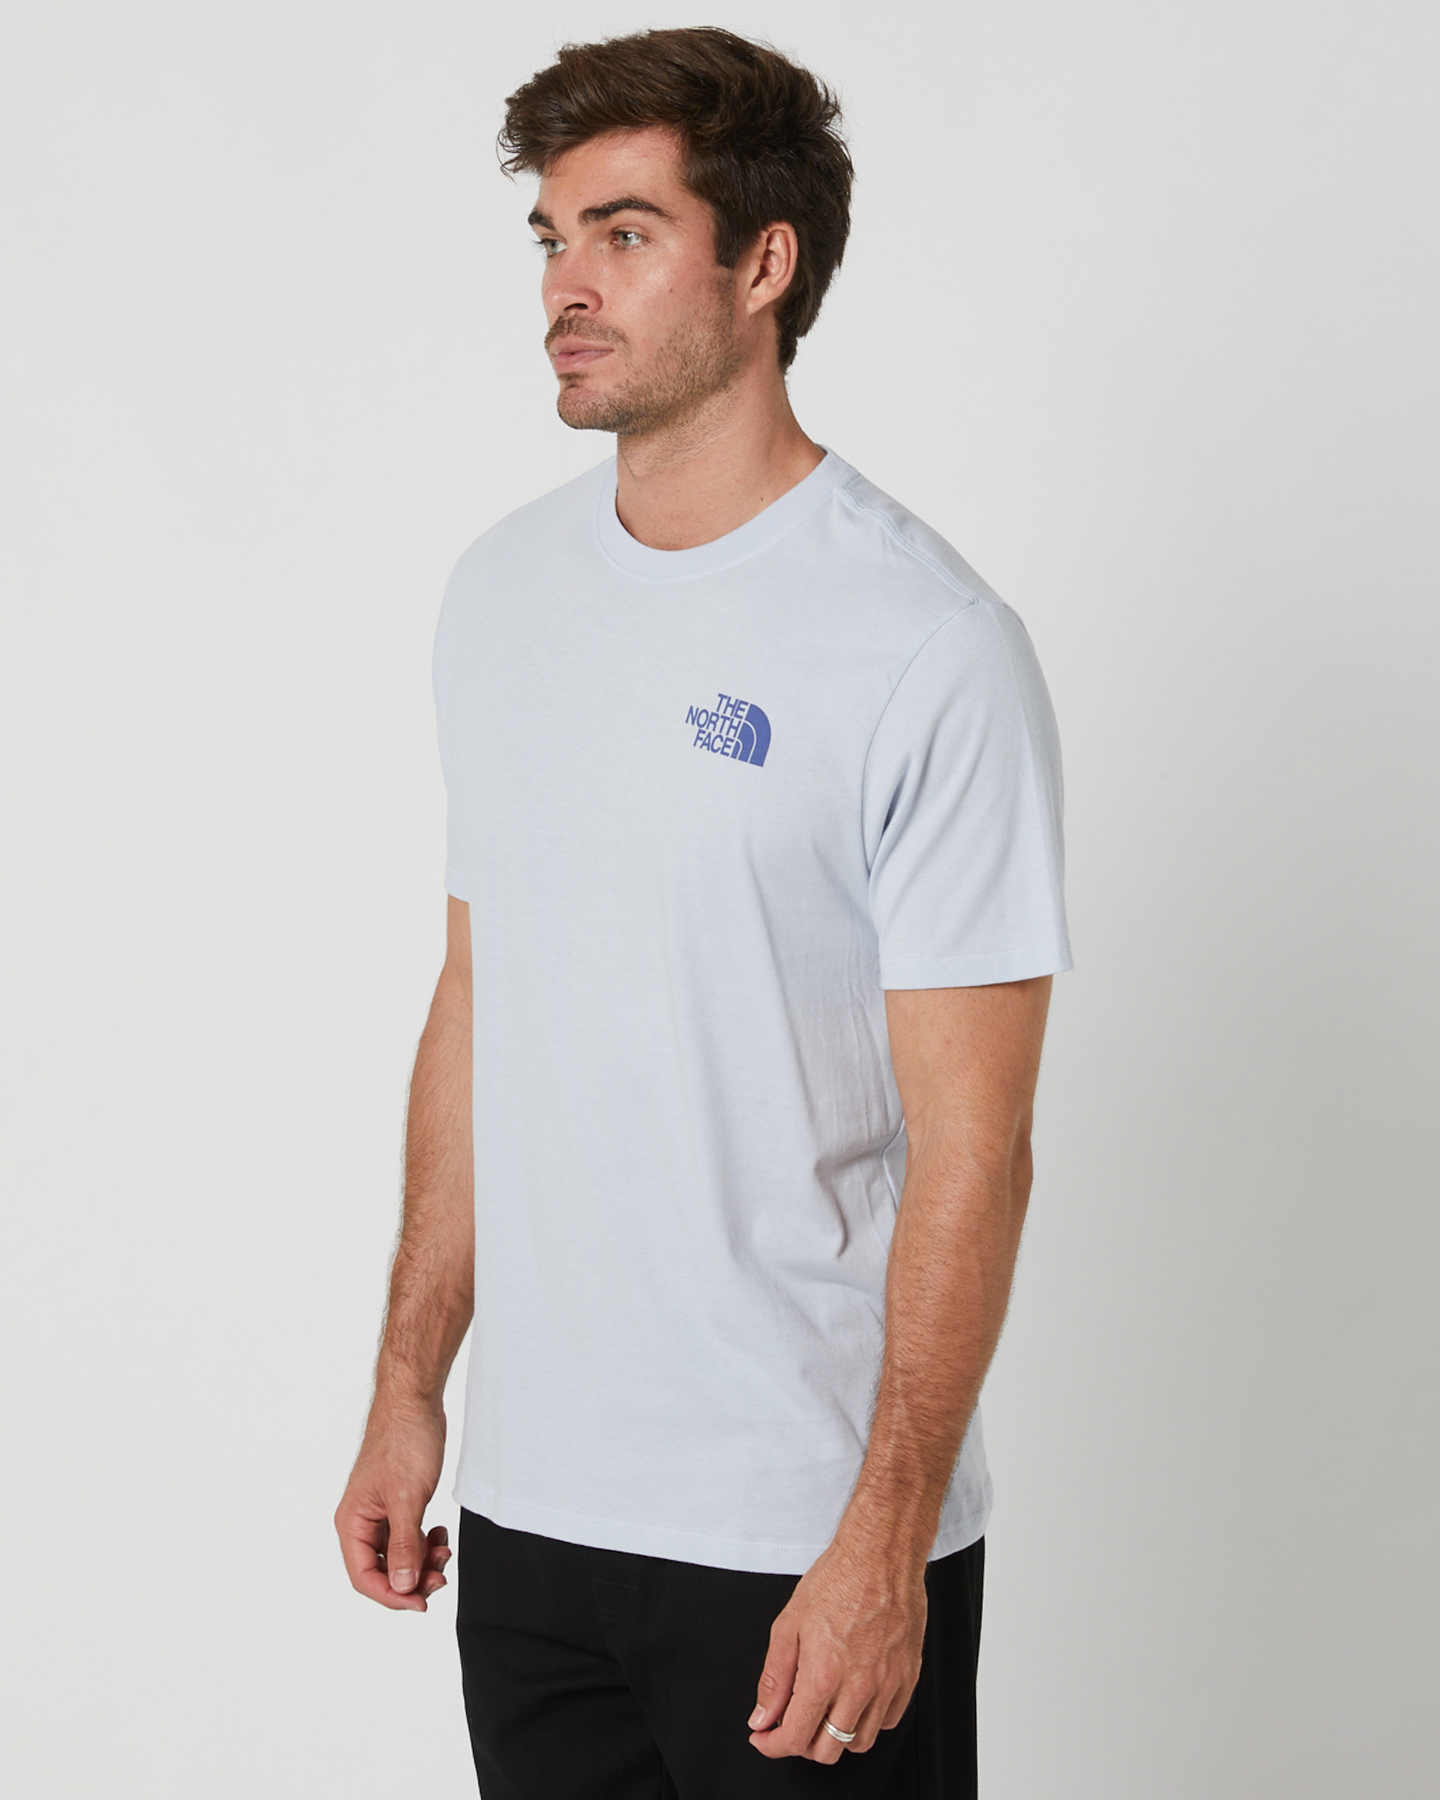 The North Face Mens Short-Sleeve Places We Love Tee - Dusty Periwinkle |  SurfStitch